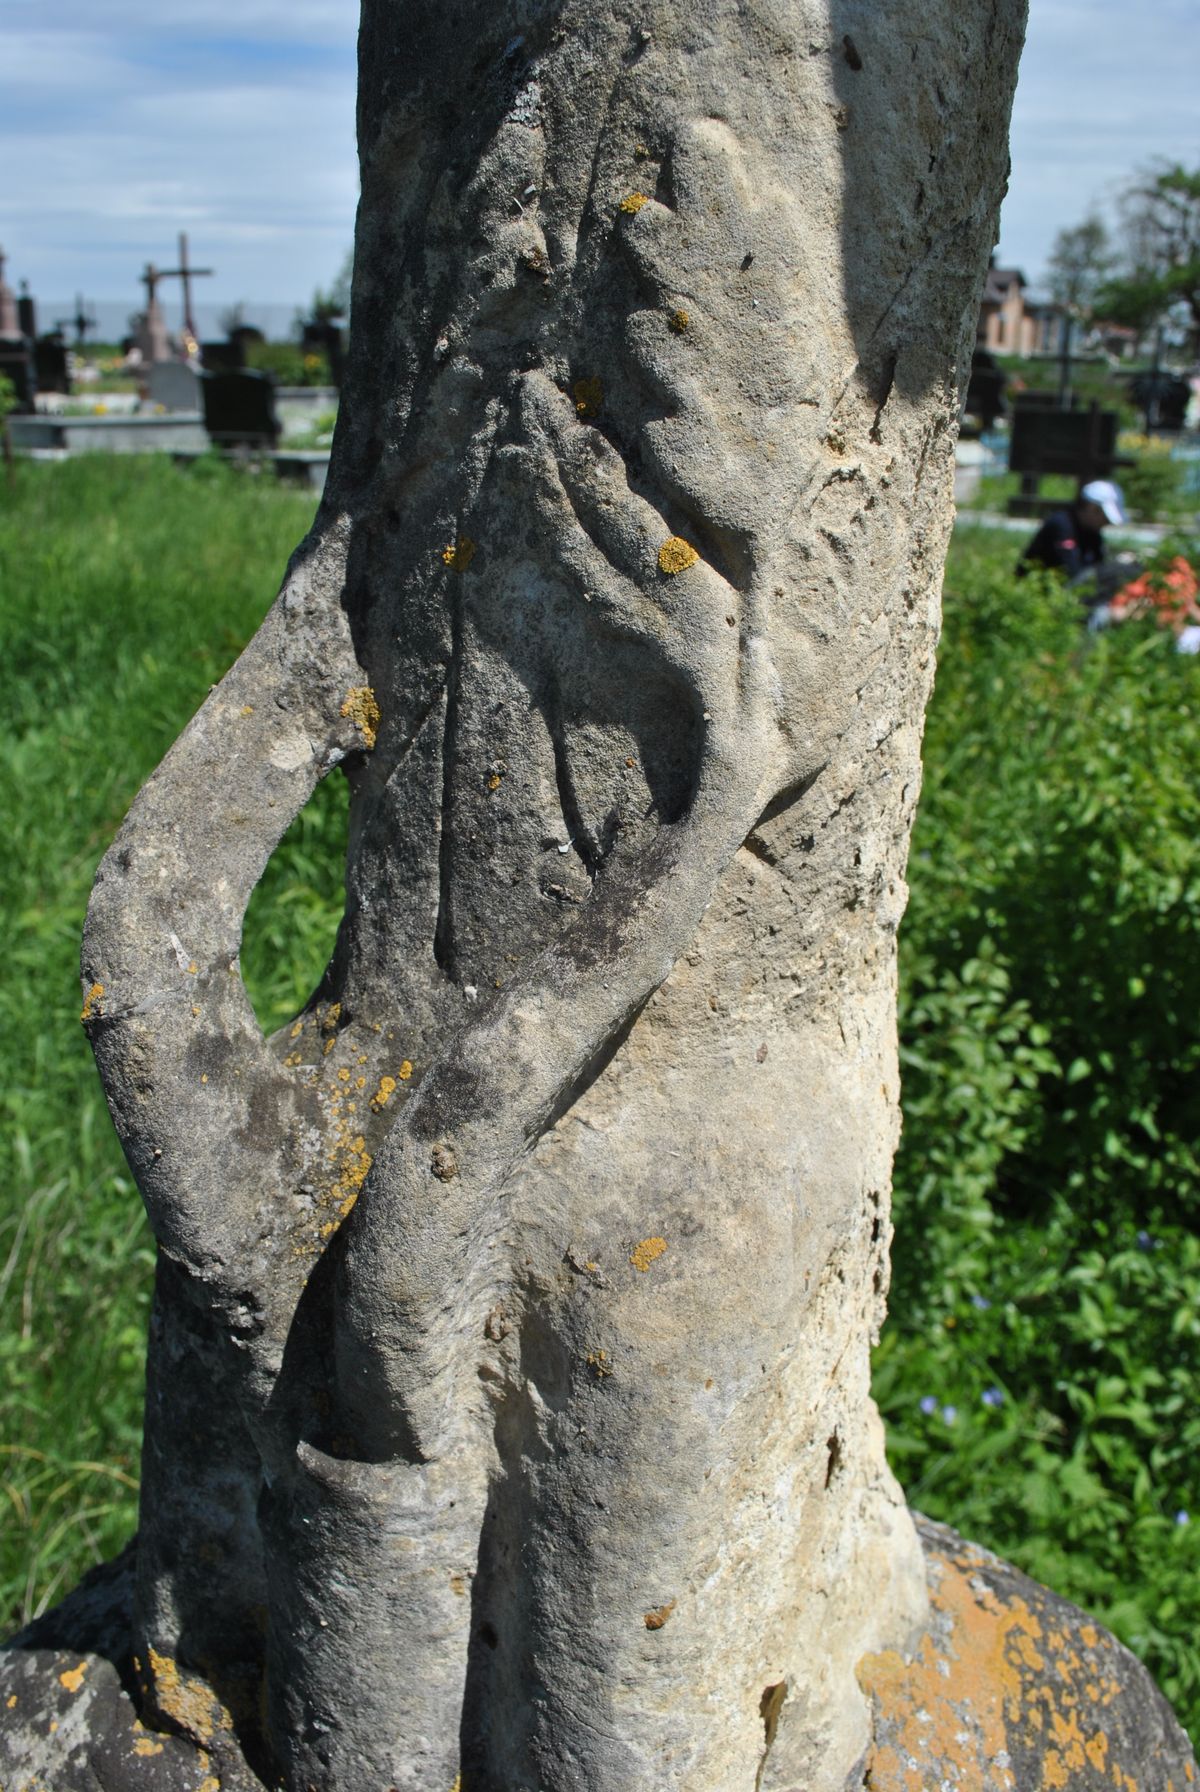 Tombstone of Jan Zator, cemetery in Poczapińce